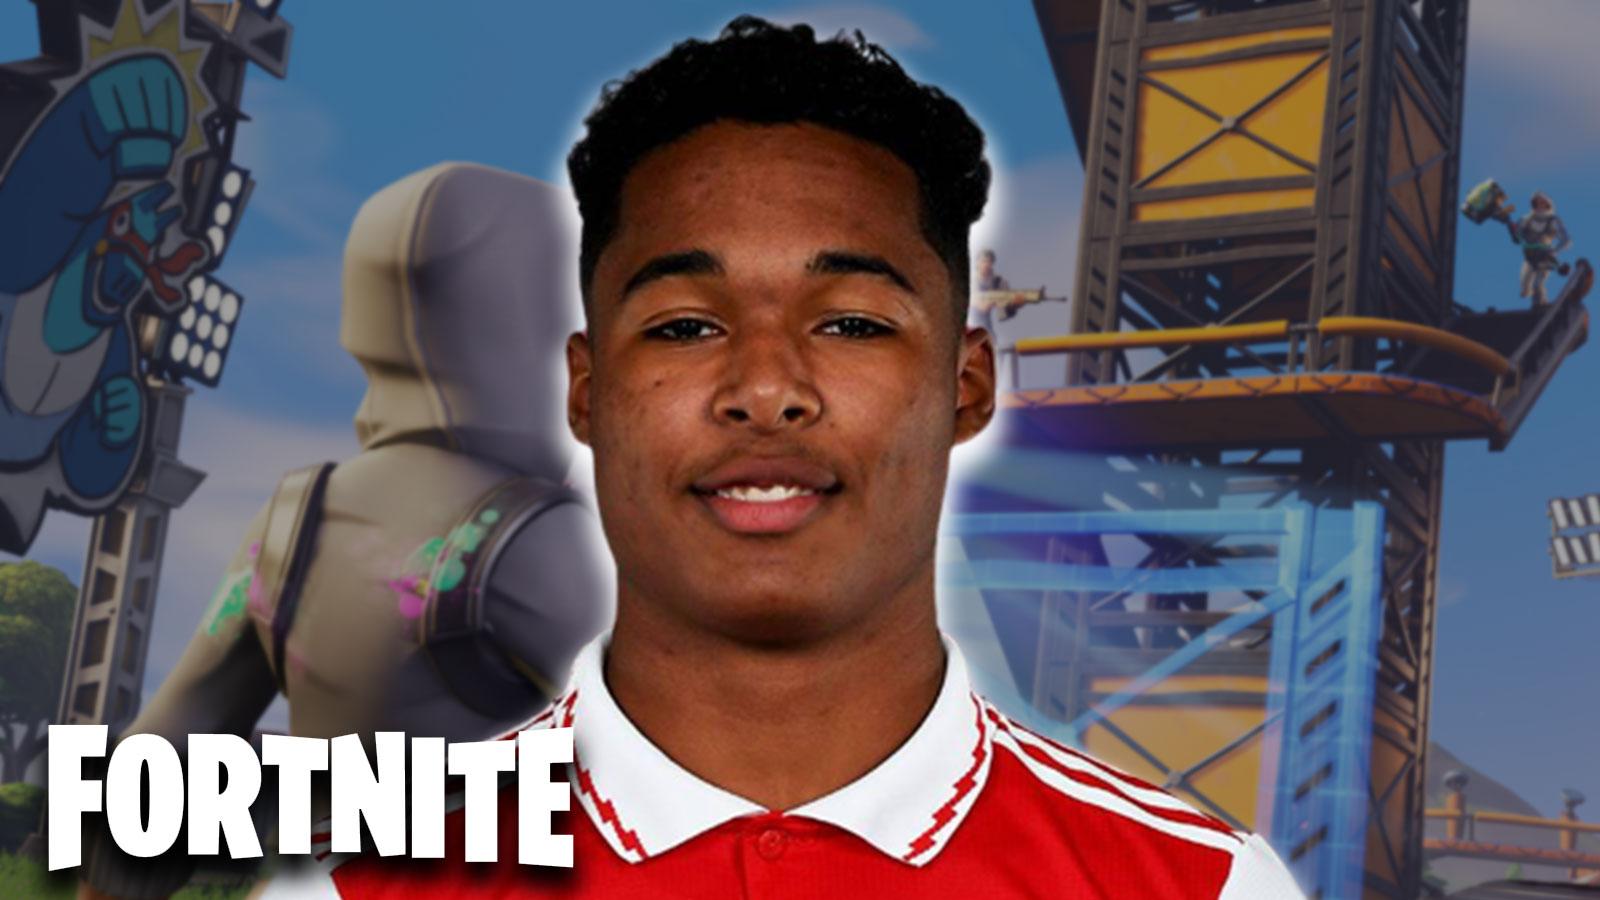 Fornite logo with Arsenal player Reuell Walters